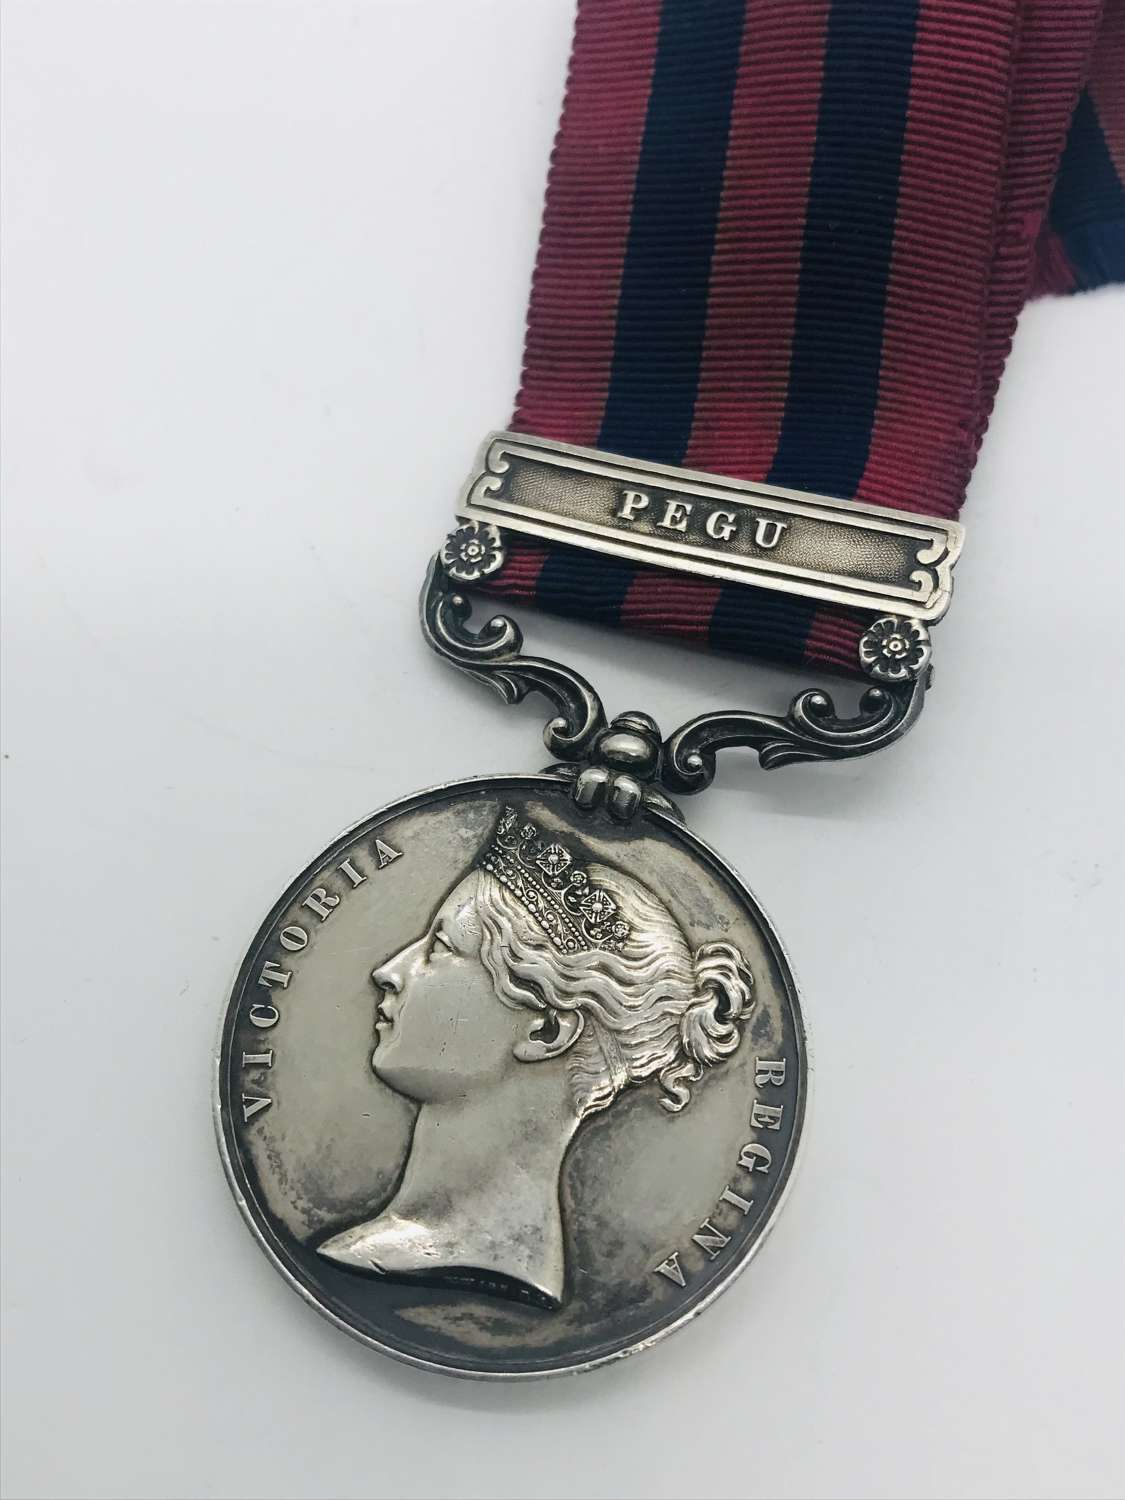 Indian general service medal with Pegu bar